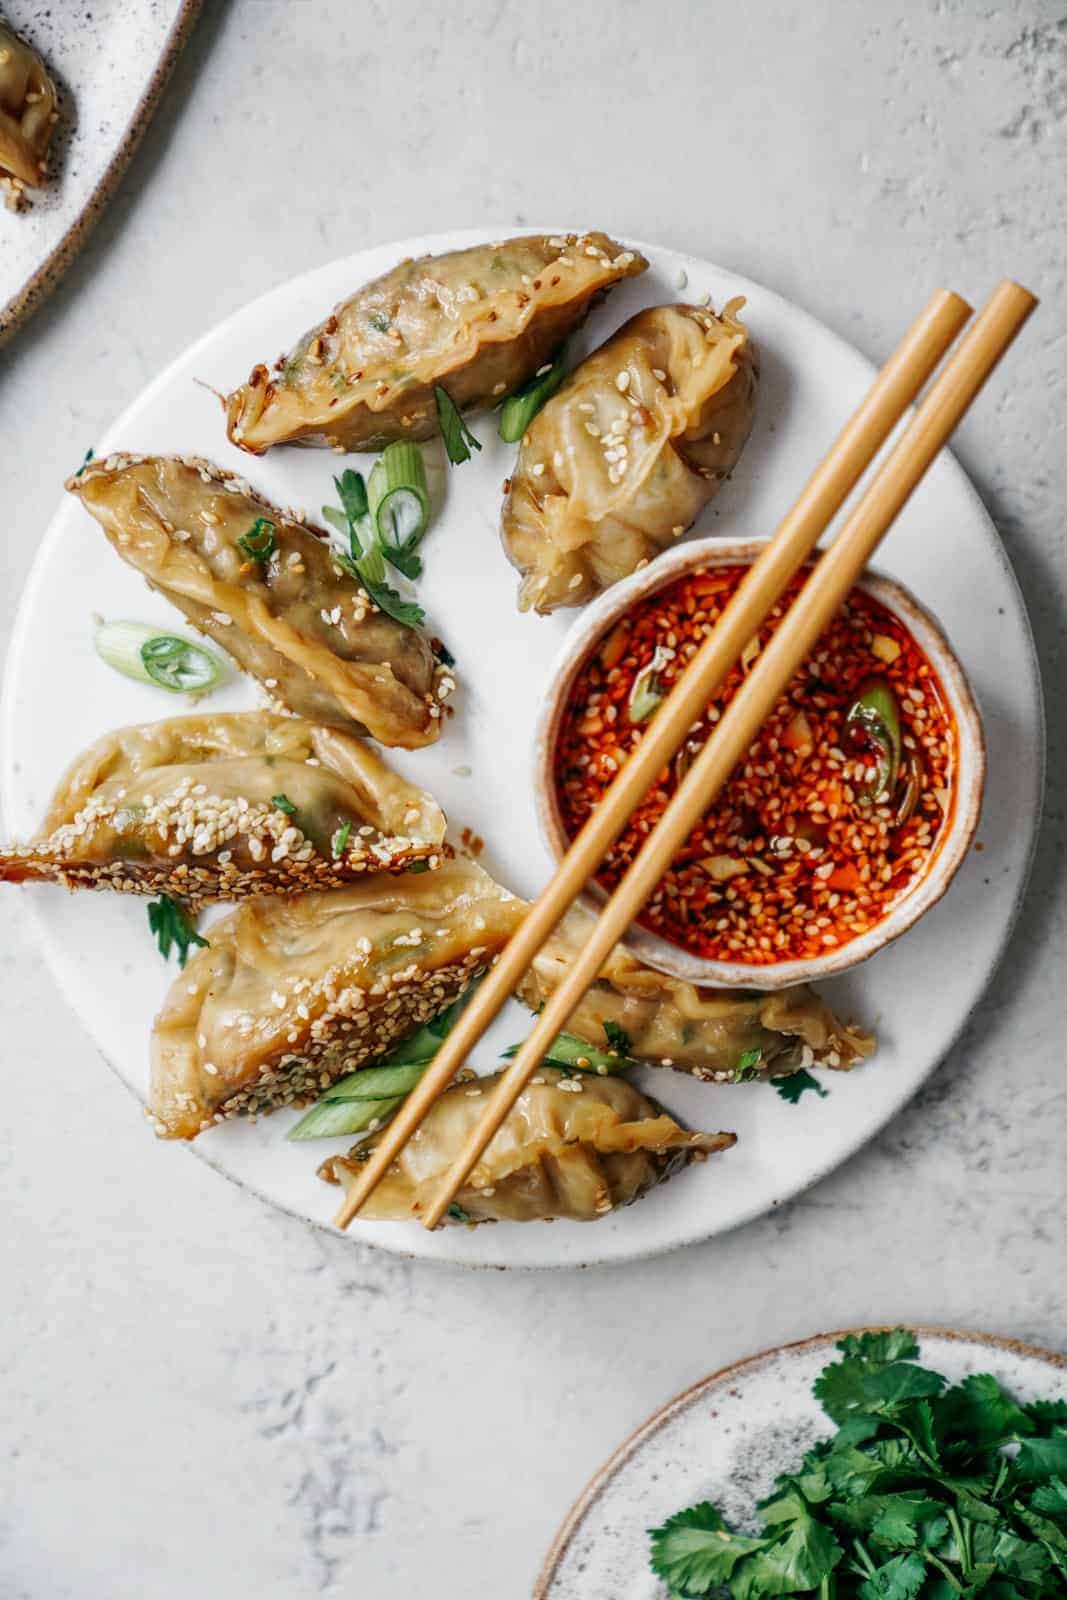 This super easy vegan potsticker recipe goes so well with my sesame chilli dipping sauce. Your whole family will love making and eating them!